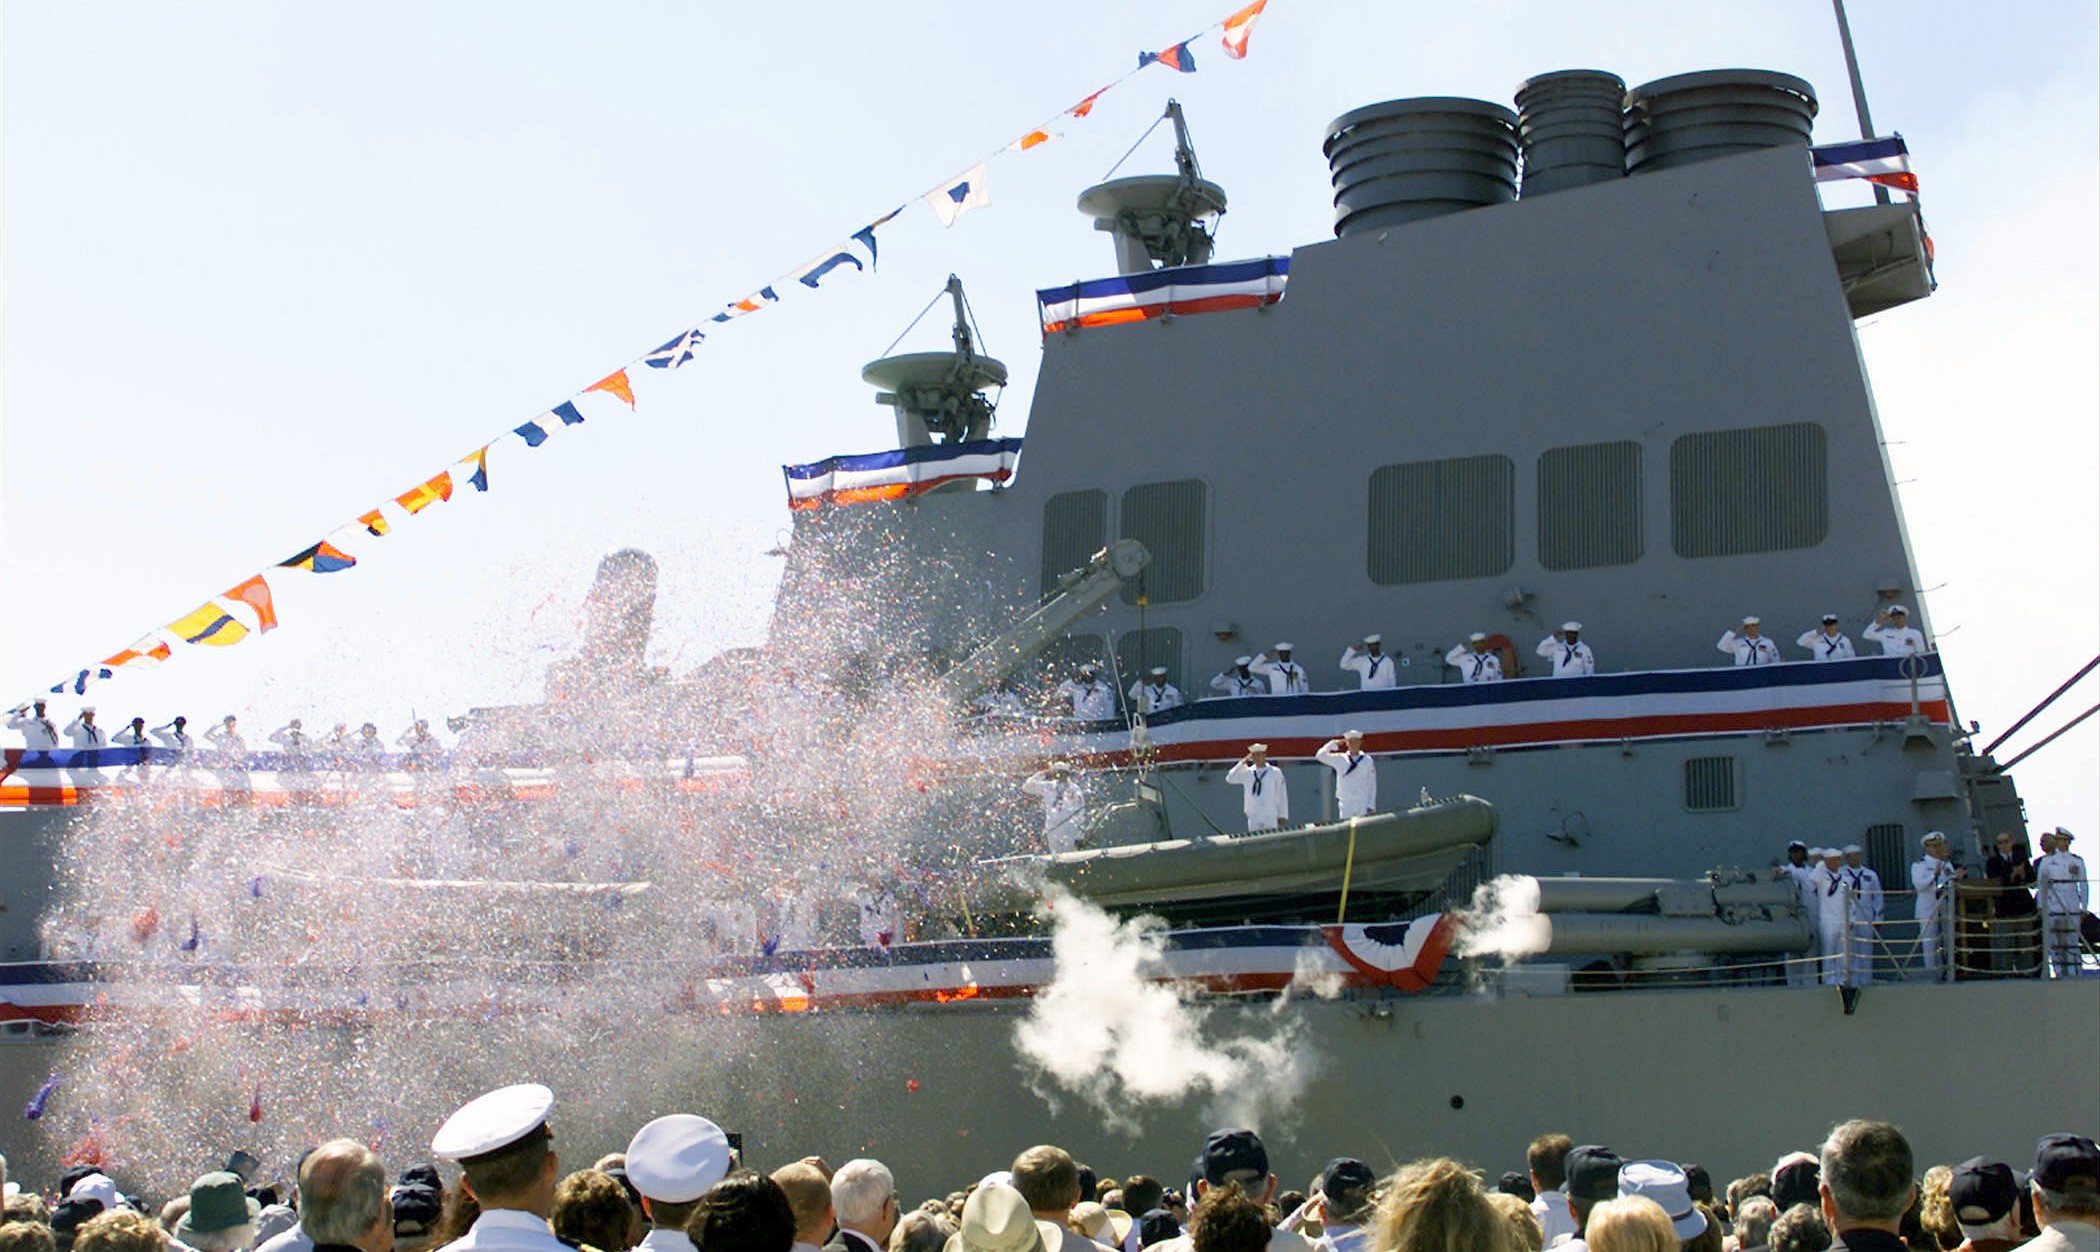 ddg-80 uss roosevelt guided missile destroyer arleigh burke class us navy 10 commissioning ceremony mayport florida